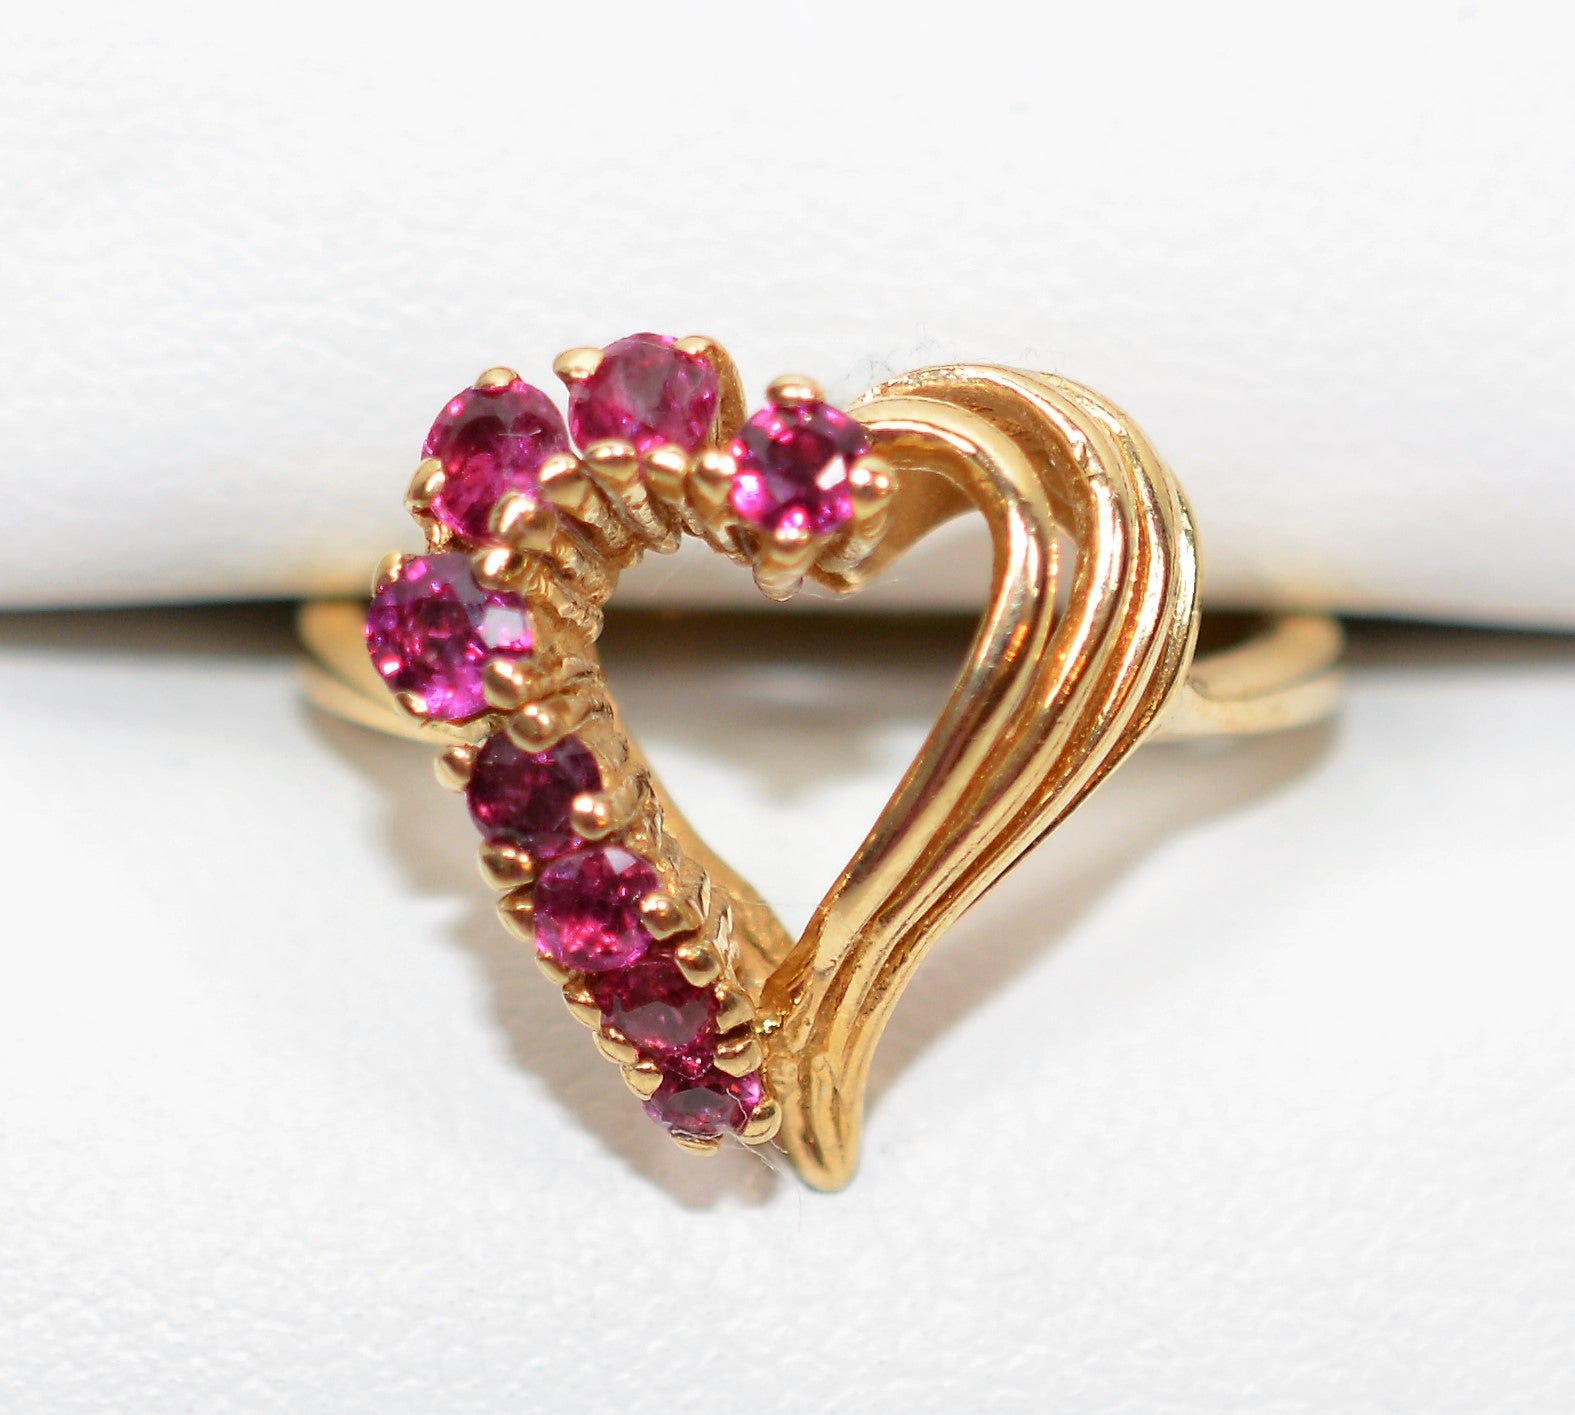 Natural Ruby Ring 14K Solid Gold .48tcw Gemstone Ring Heart Ring Women's Ring Ladies Ring Statement Ring Cocktail Ring Valentines Day Ring